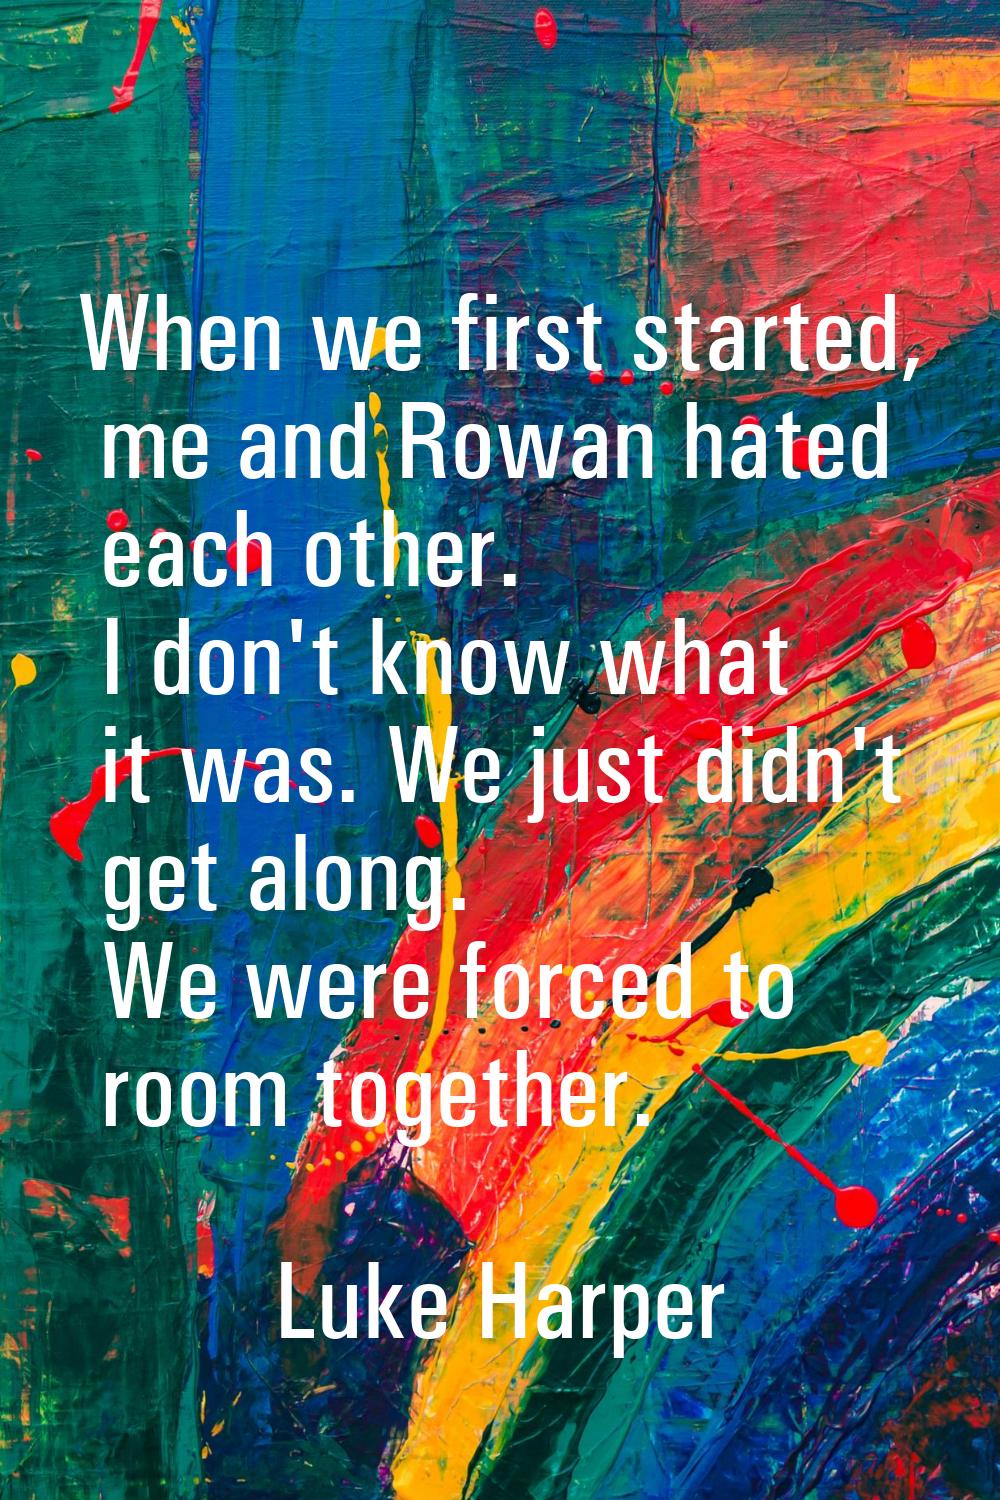 When we first started, me and Rowan hated each other. I don't know what it was. We just didn't get 